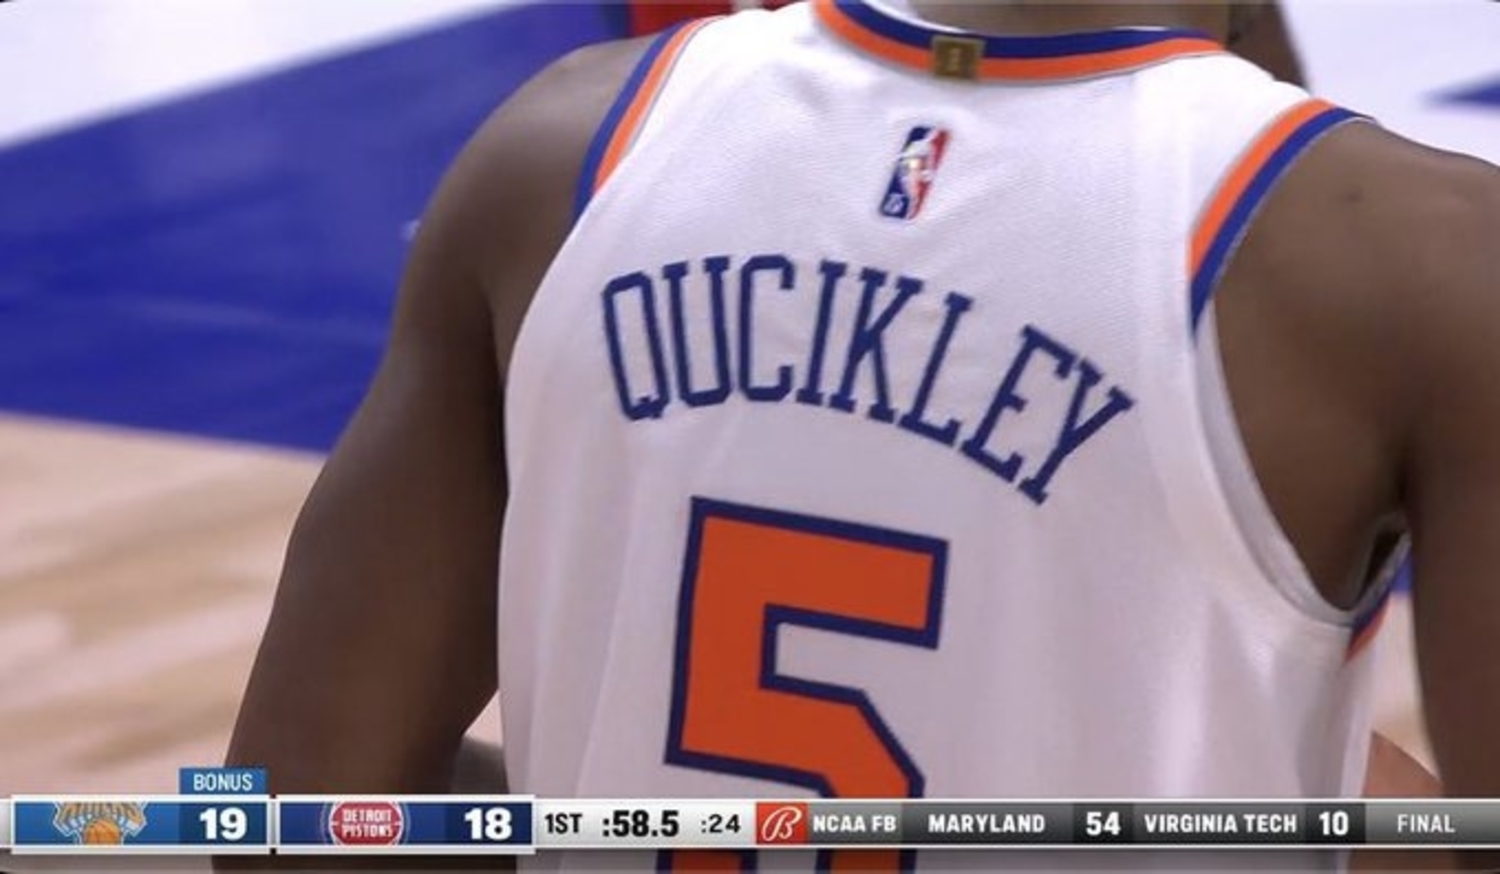 Look: Knicks guard's name was badly misspelled on his jersey